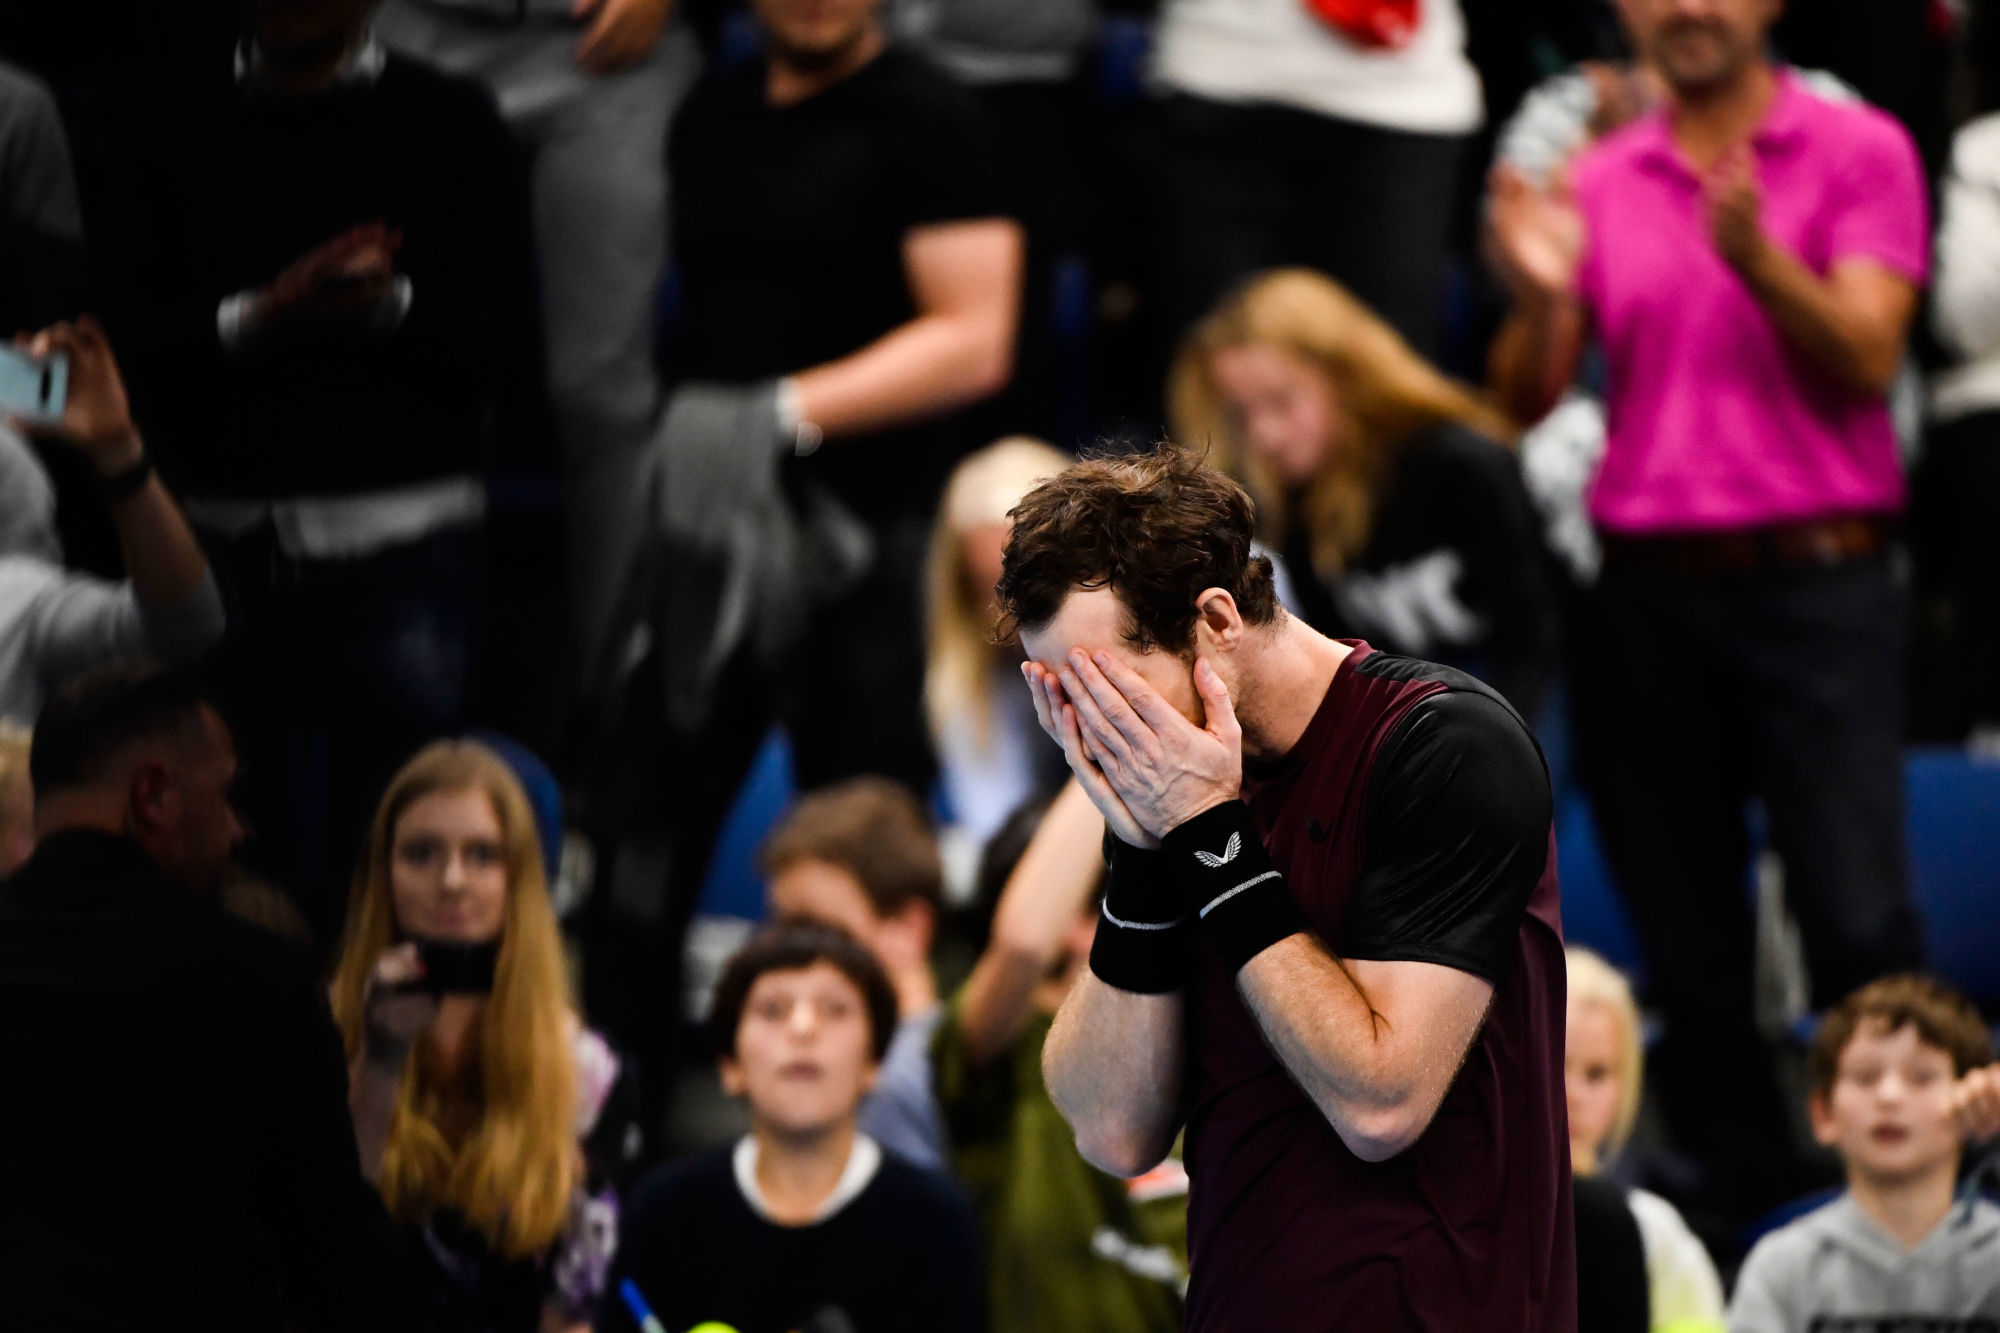 British Andy Murray celebrates after winning a tennis game  , in the final of the men's singles tournament at the European Open ATP Antwerp, Sunday 20 October 2019 in Antwerp. This year's edition of the tournament is taking place from 14 to 20 October. 
BELGA PHOTO JOHN THYS 

Photo by Icon Sport - Andy MURRAY